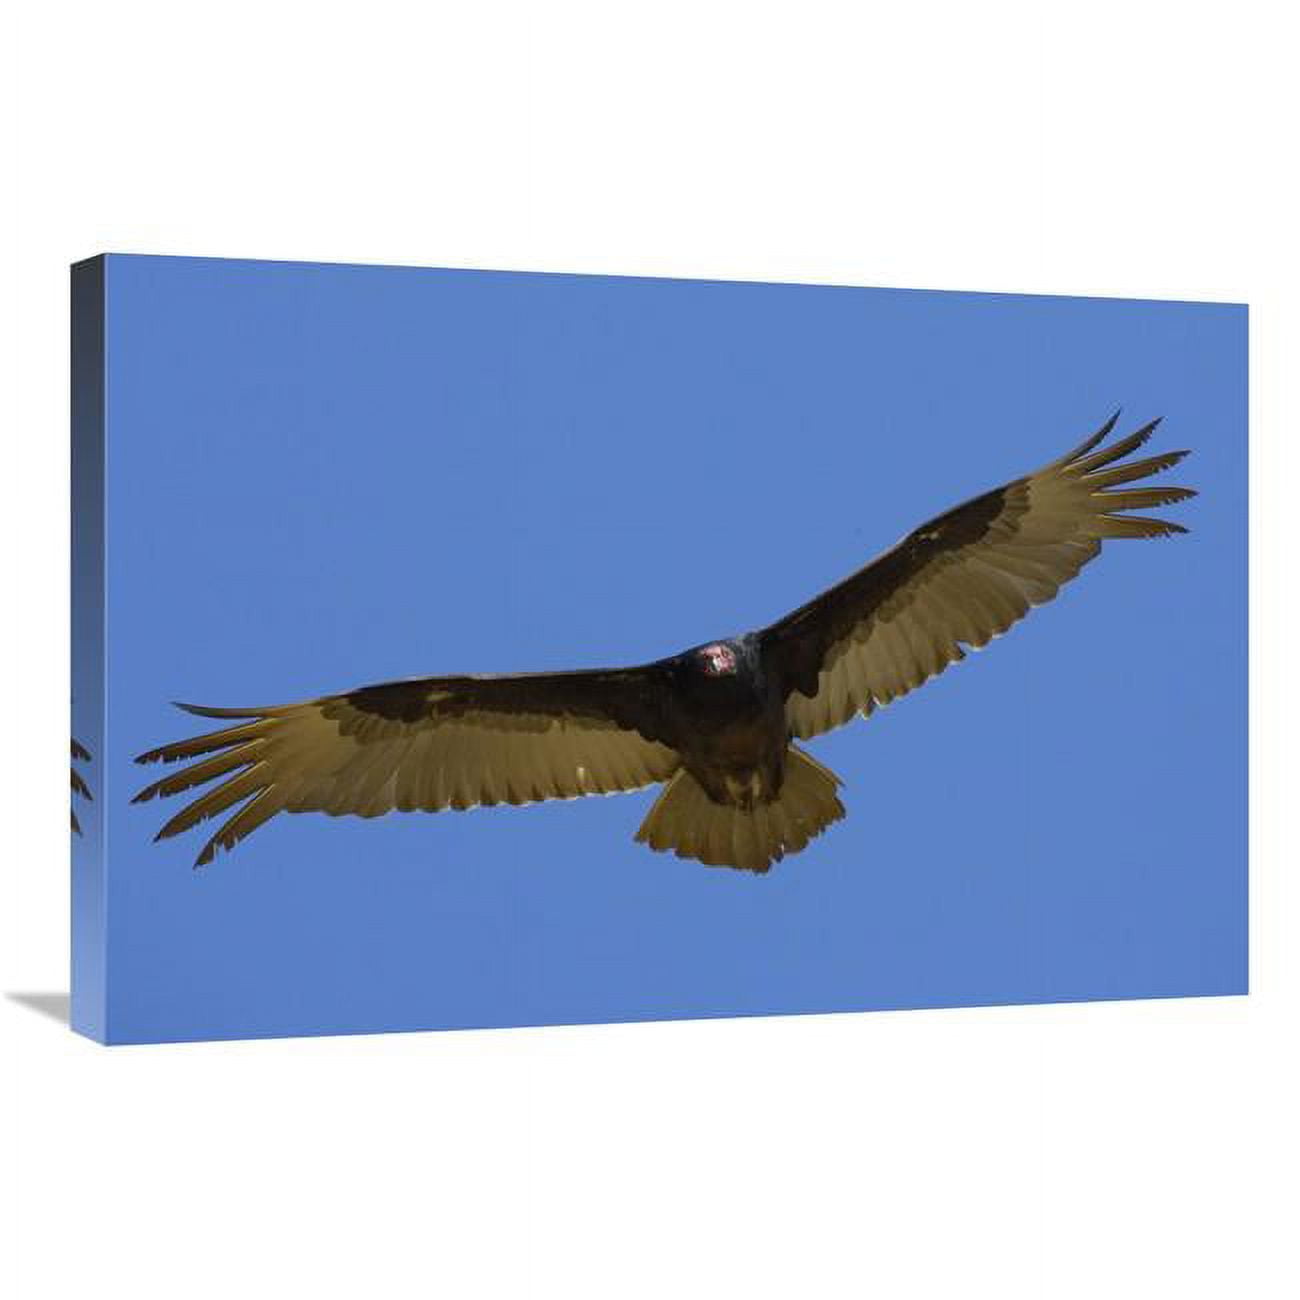 JensenDistributionServices 20 x 30 in. Turkey Vulture Soaring Overhead, Native to North America Art Print - San Diego Zoo